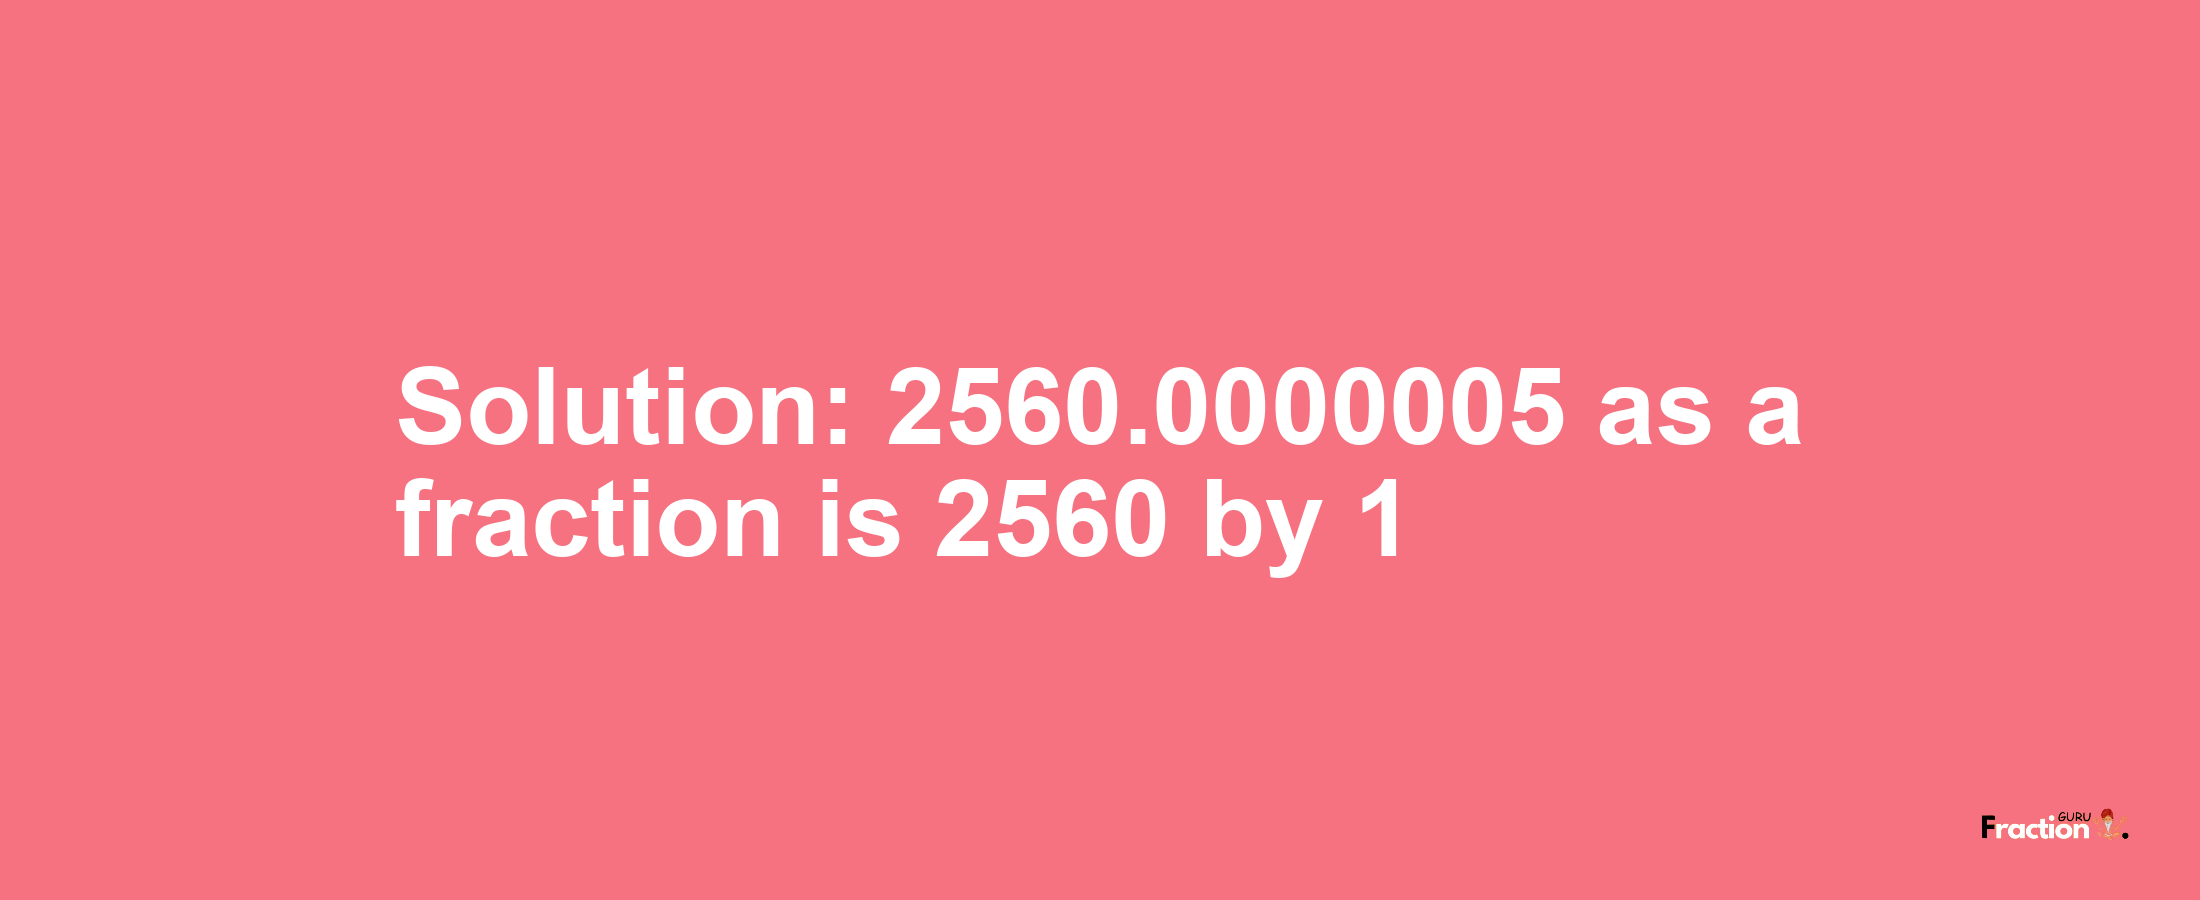 Solution:2560.0000005 as a fraction is 2560/1